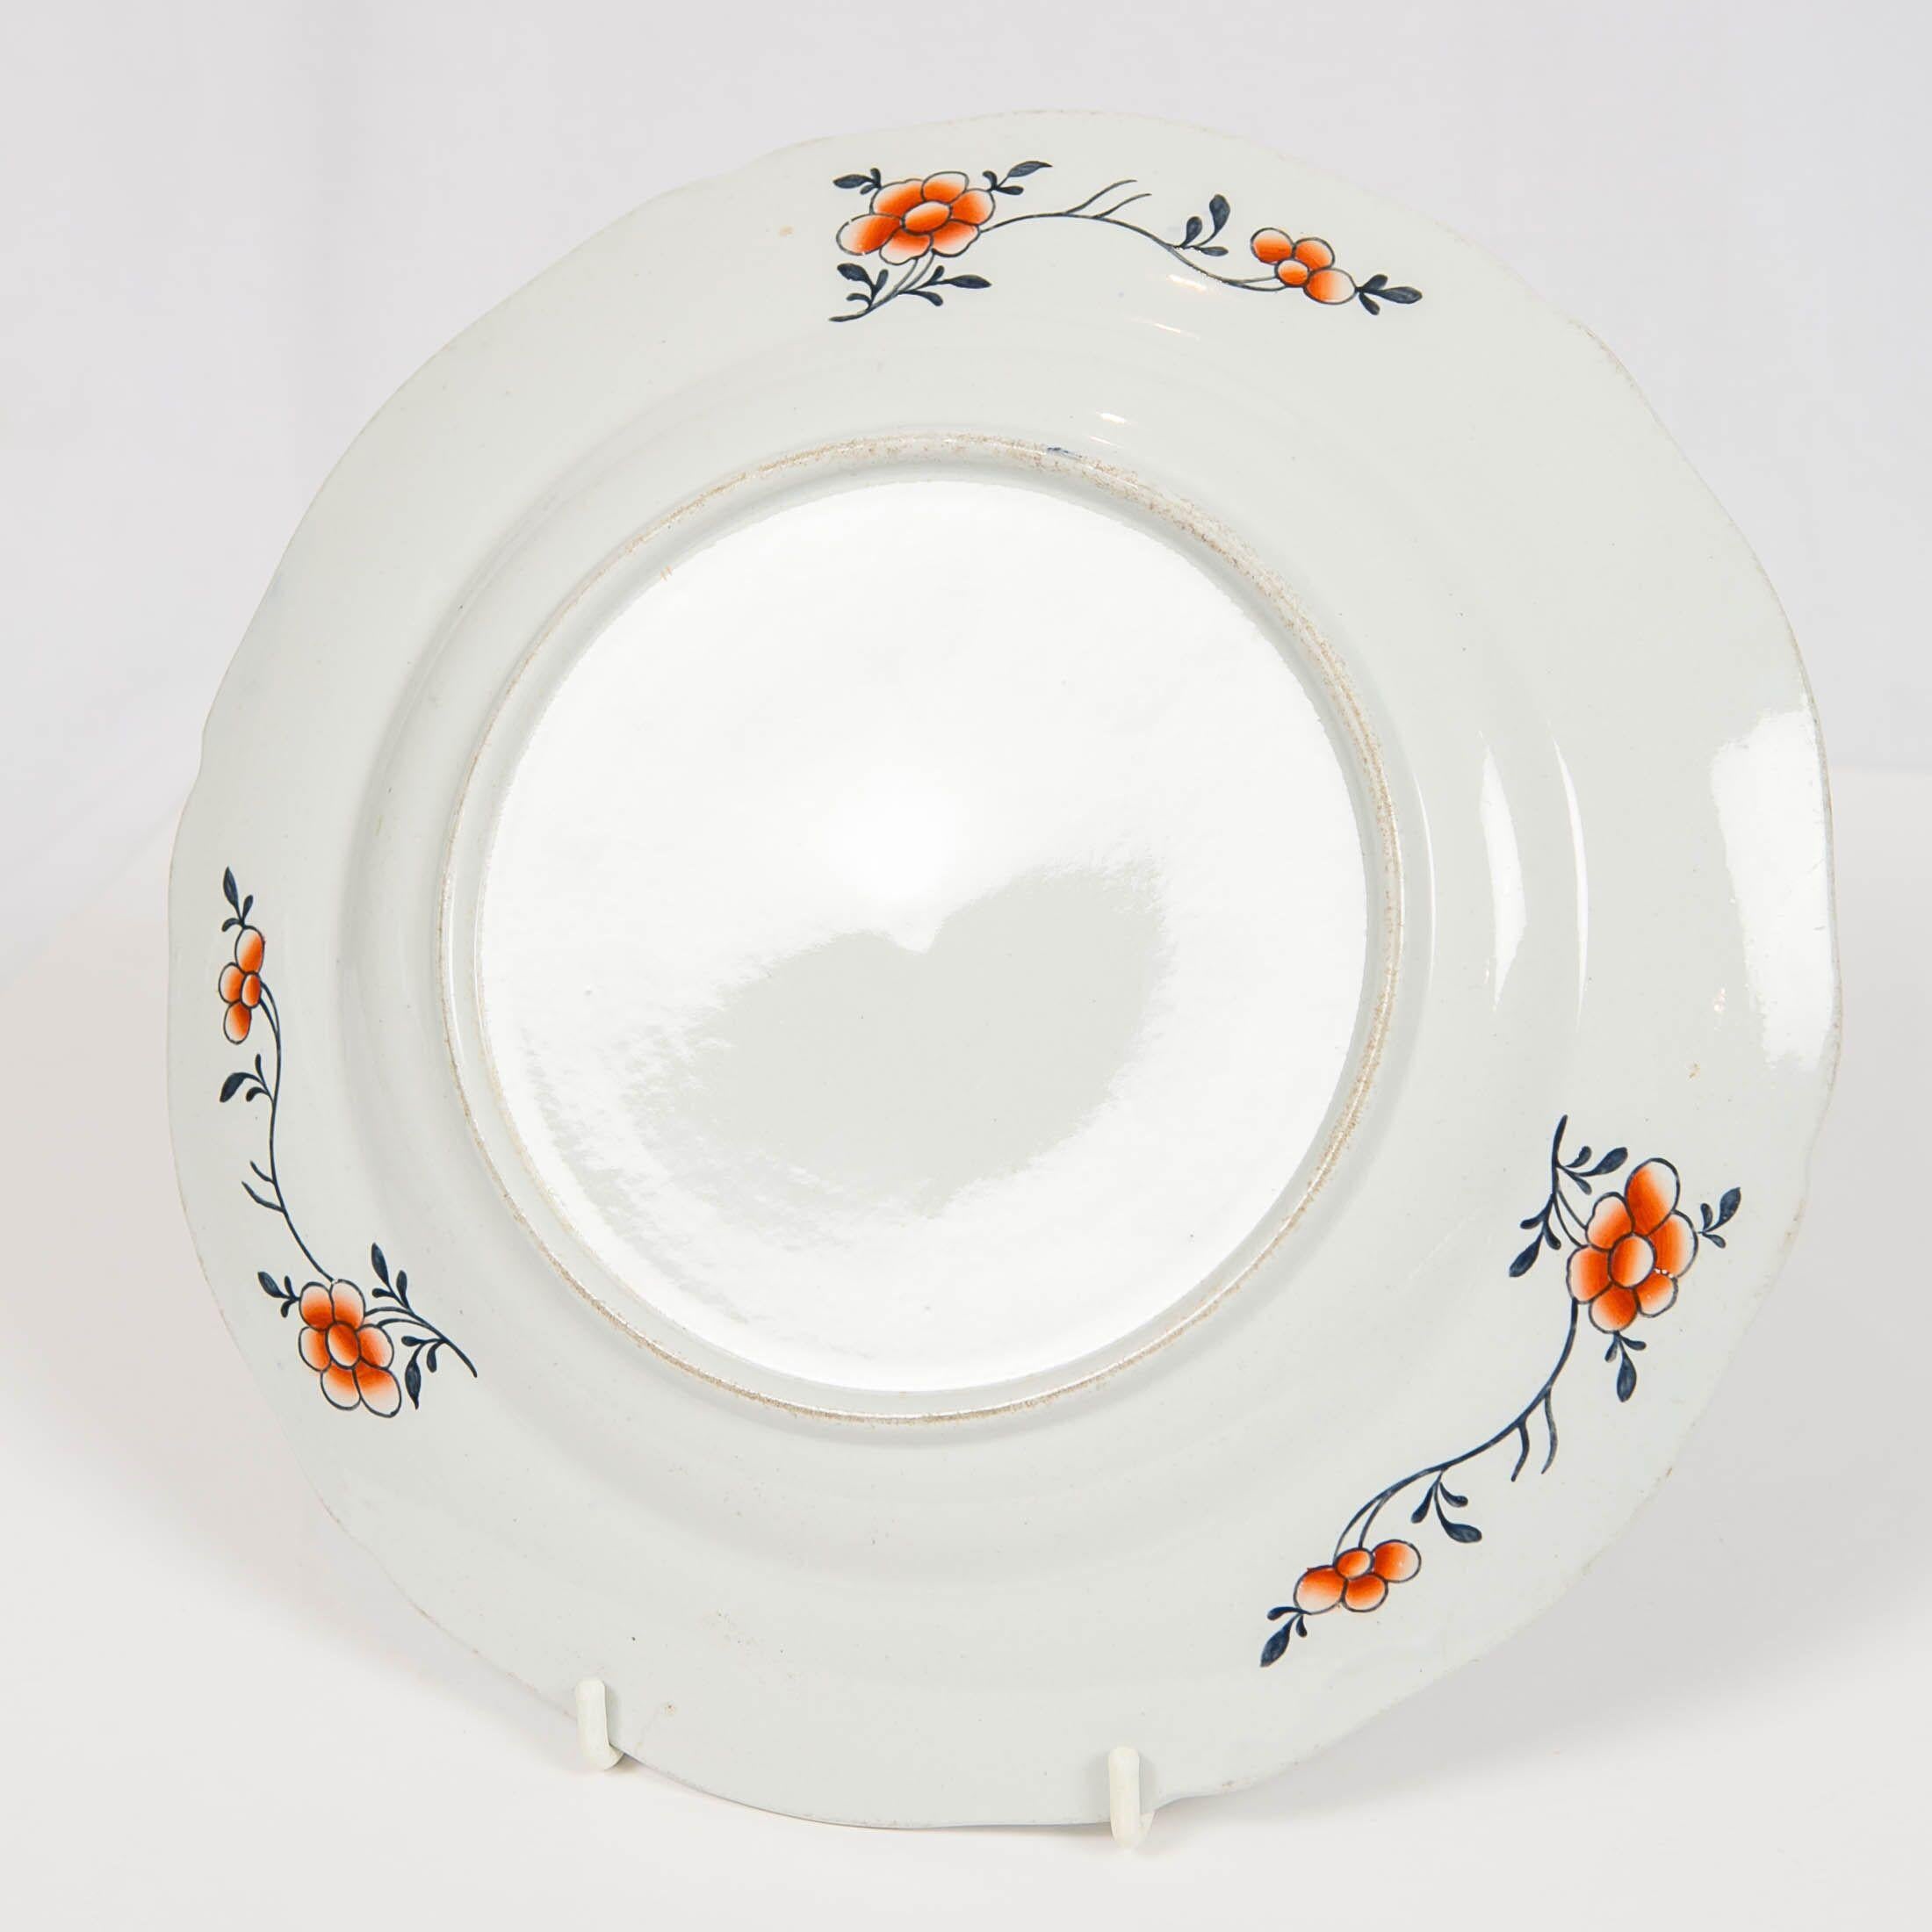 Three Large Tobacco Leaf Plates Made by Spode in England, circa 1820 5